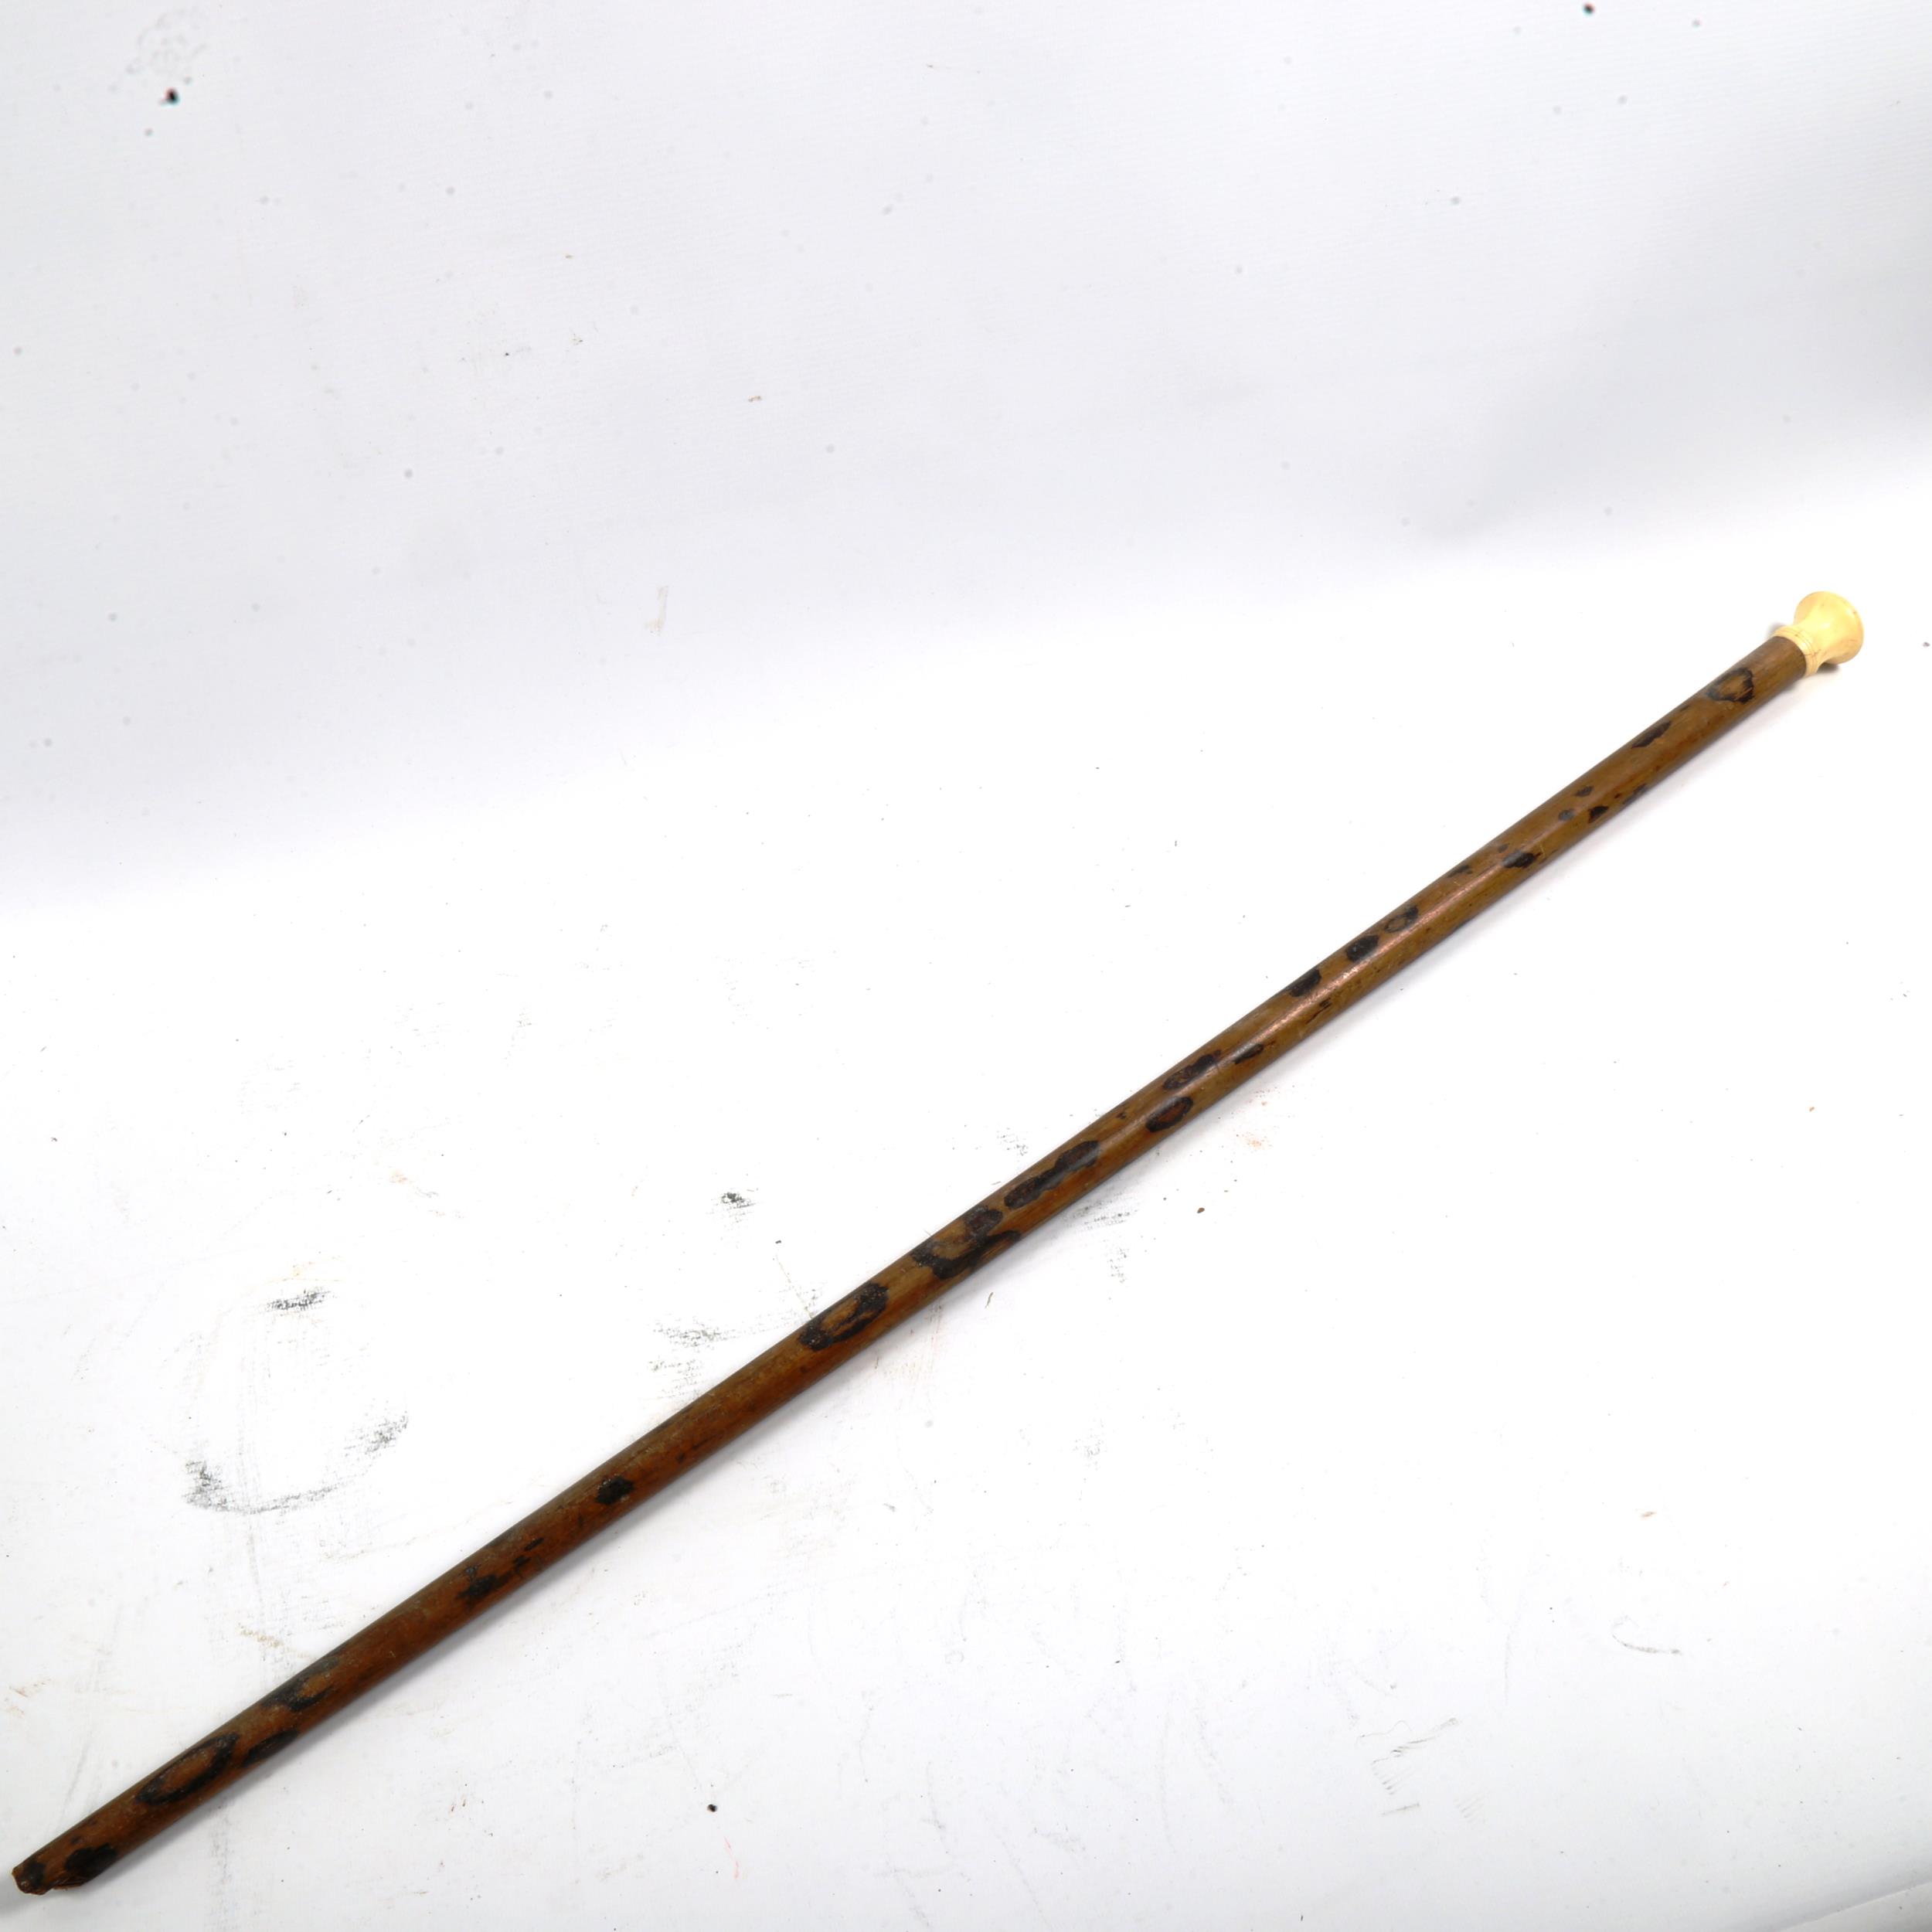 An 18th/19th century ivory-handled walking cane, with seal top - Image 2 of 5